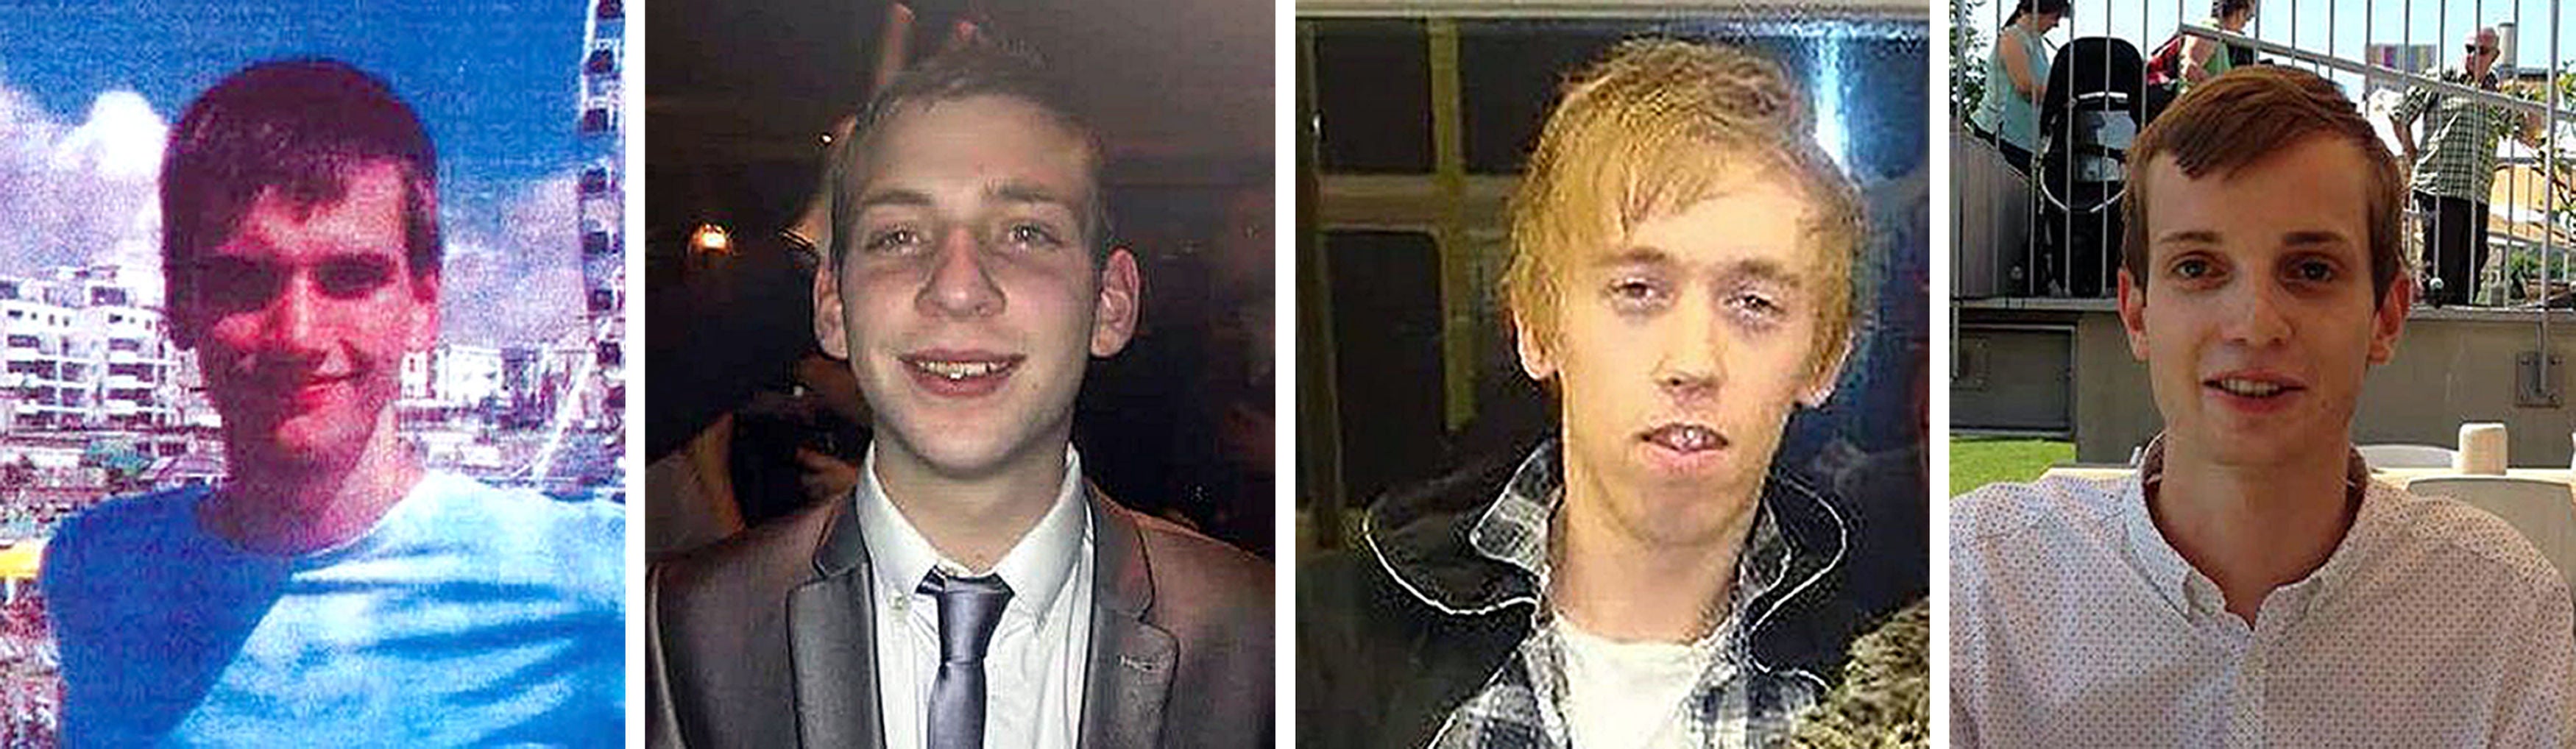 Anthony Walgate and Gabriel Kovari were two of Stephen Port’s four victims in his murder spree (handouts/PA)